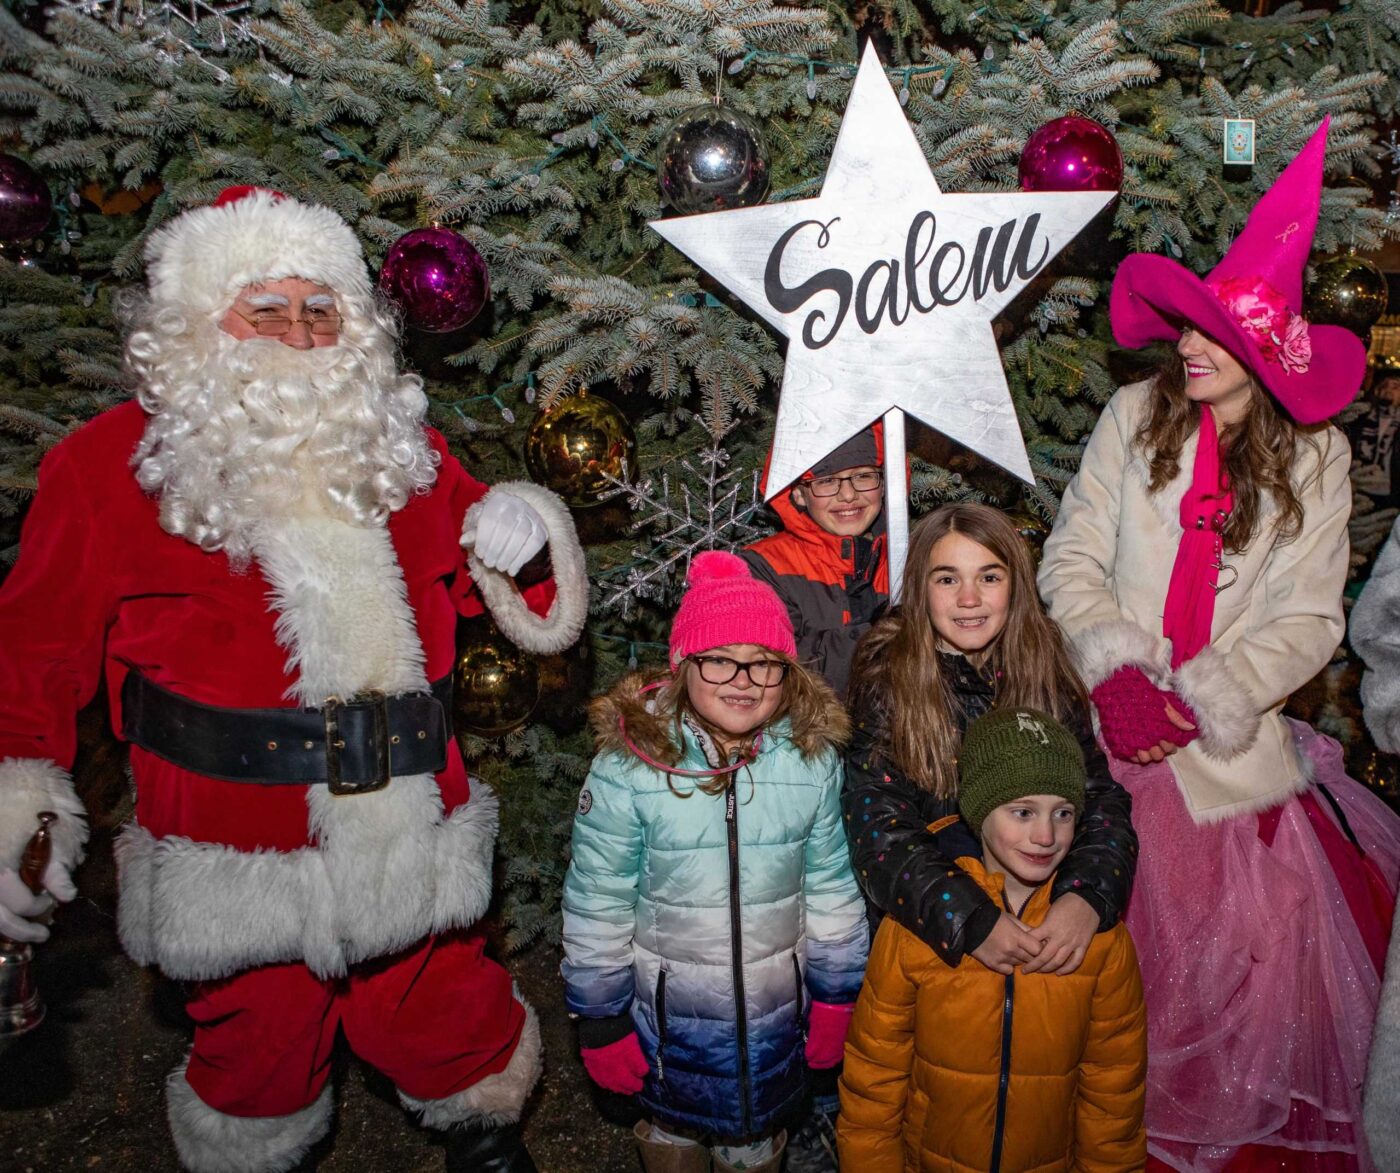 Santa kids and the good witch of salem at tree lighting